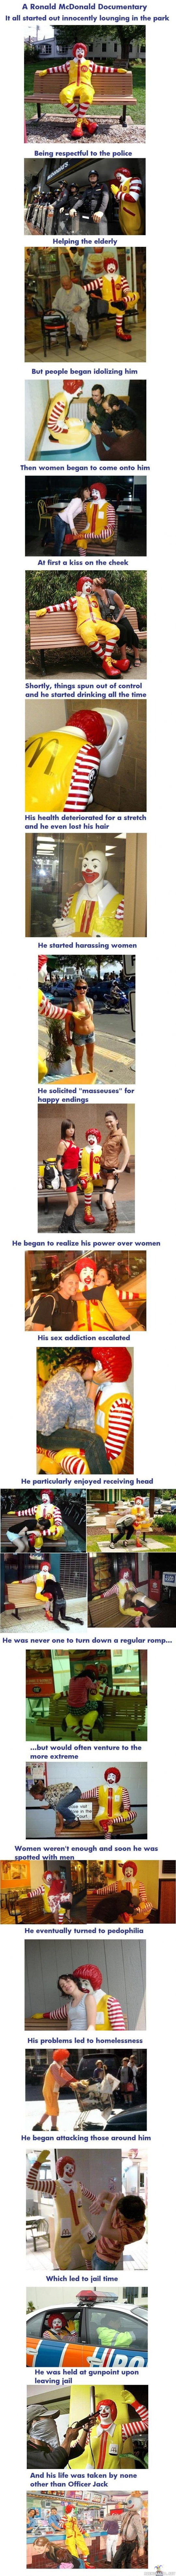 Ronald McDonald - The rise and downfall.